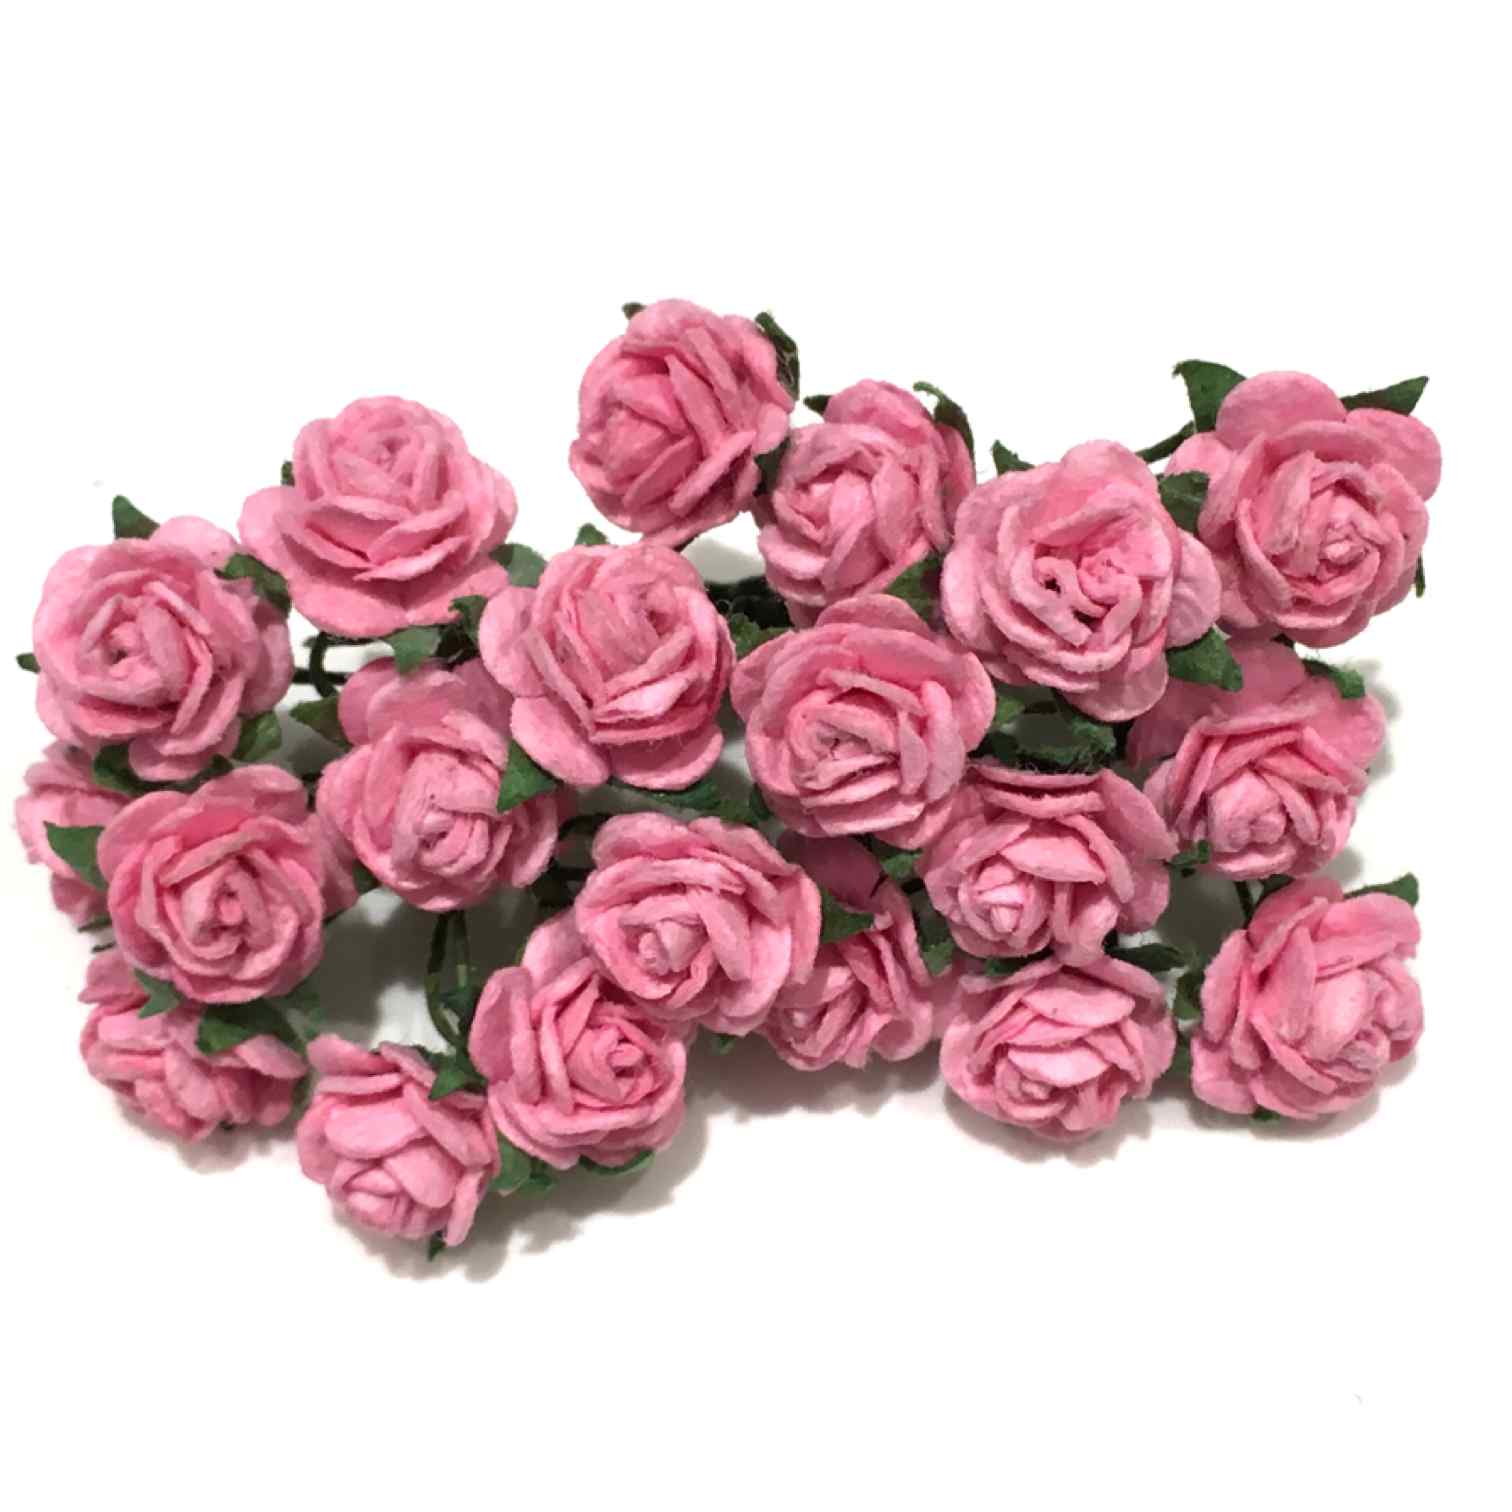 Deep Pink Open Mulberry Paper Roses Or036